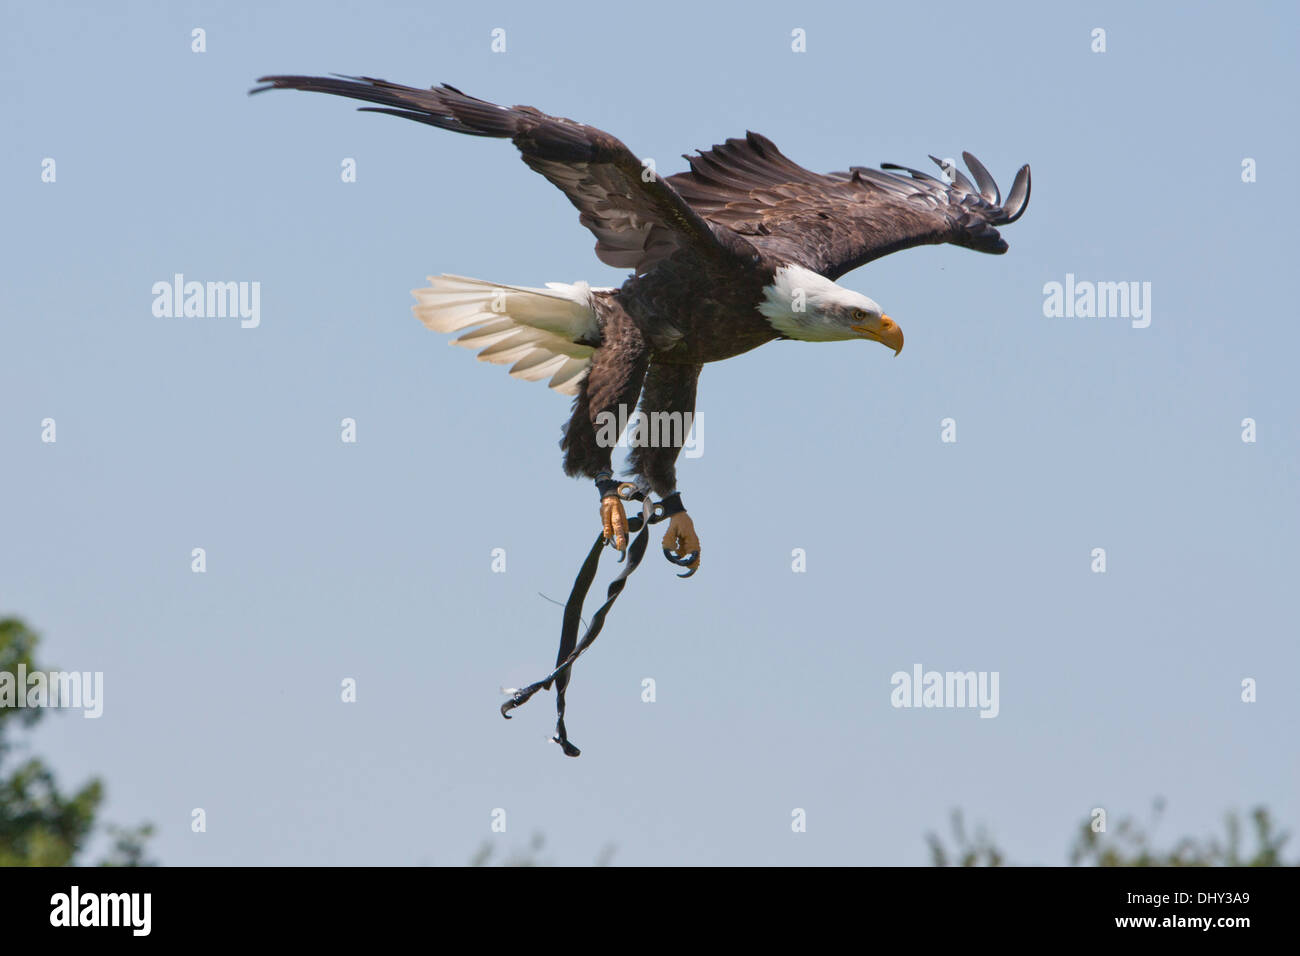 Captive North American Bald Eagle just released from falconer's glove Stock Photo